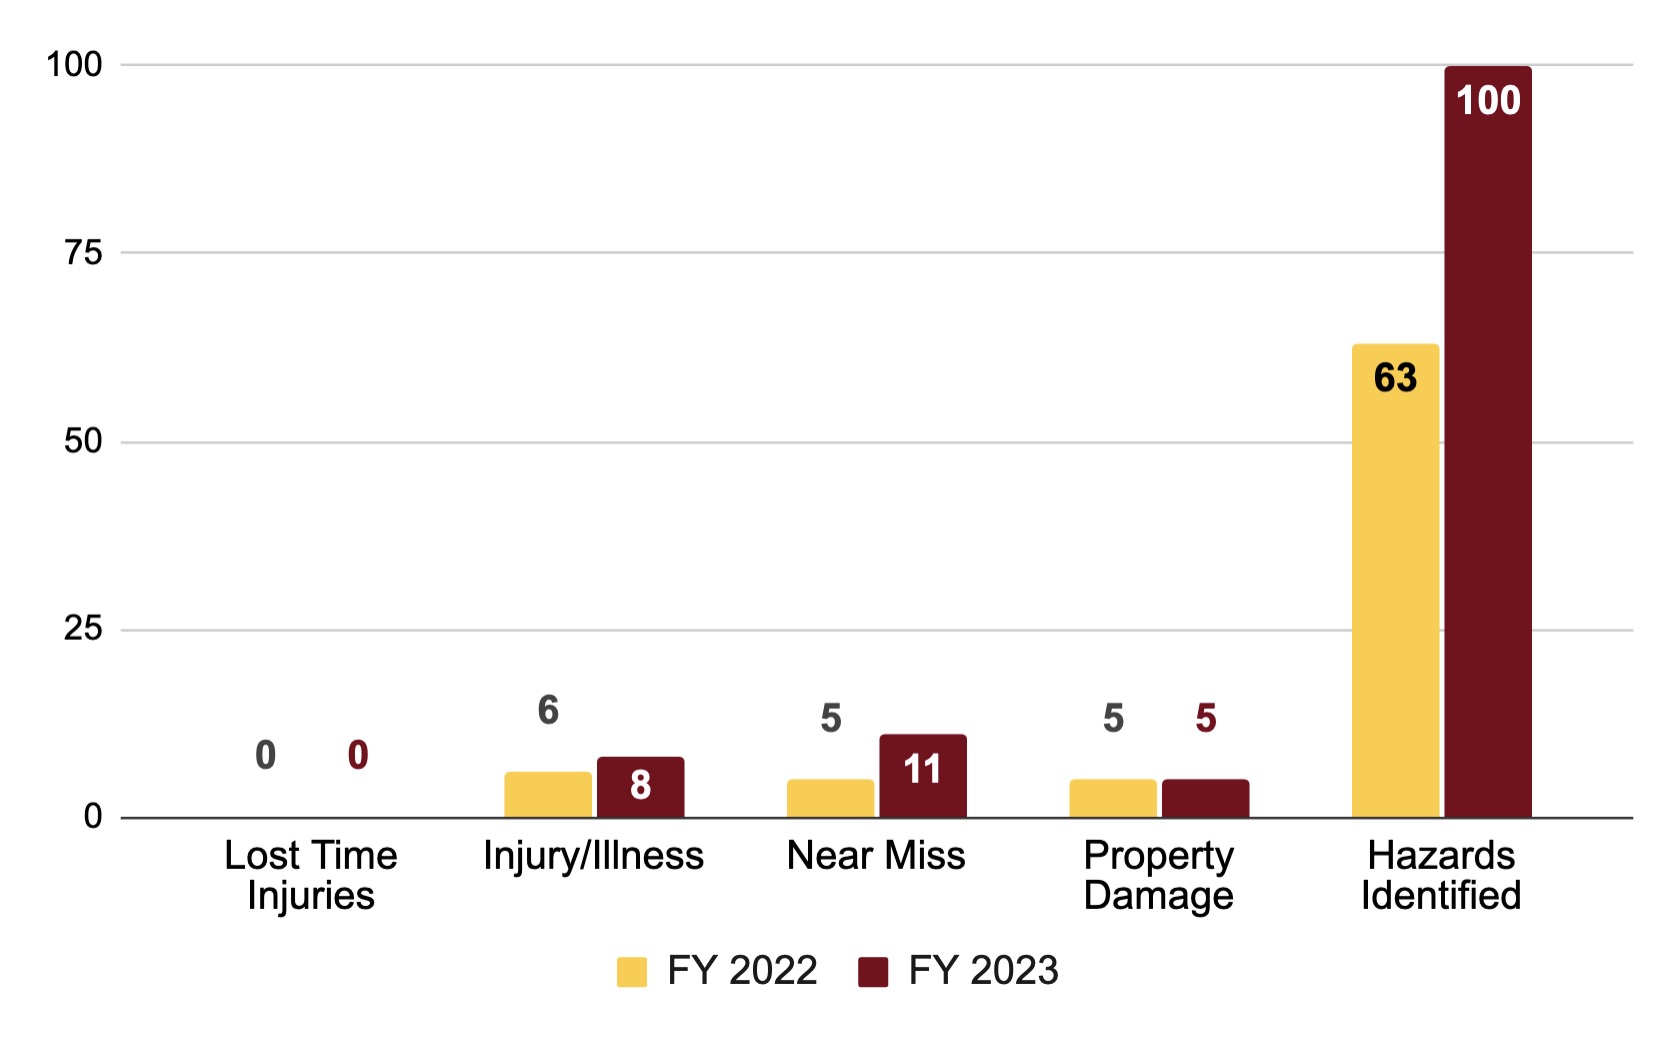 Chart: Lost time injuries - 0 in both FY 2022 and FY 2023; Injuries and Illness - 6 in FY 2022, 11 in FY 2023; Property damage - 5 in both FY 2022 and FY 2023; Hazards Identified: 63 in FY 2022, 100 in FY 2023